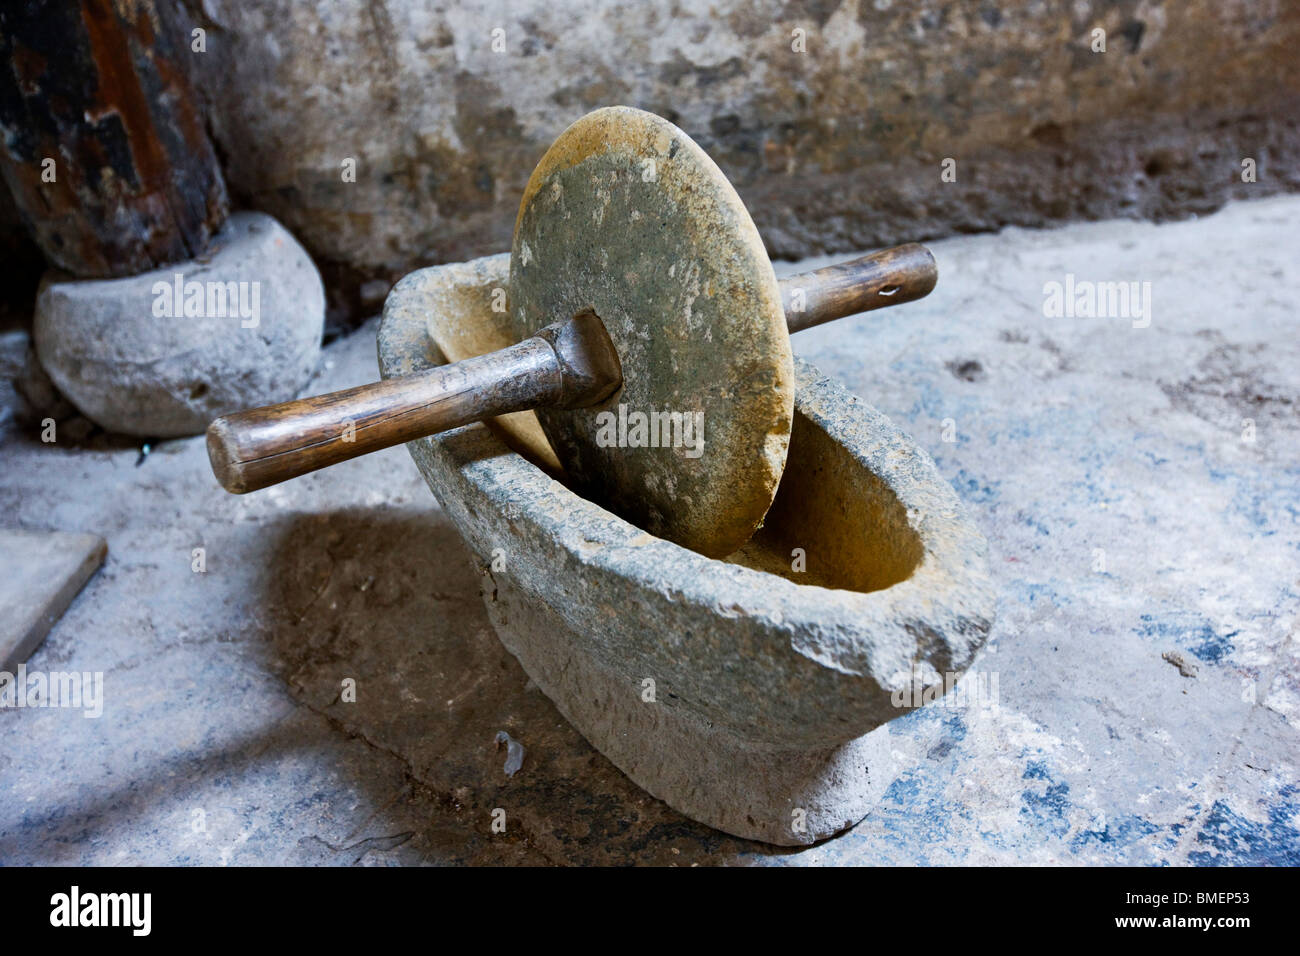 Stone grinder for processing herbs in a Chinese herbal medicine store, Zhuge Bagua Village, Jinhua, Zhejiang Province, China Stock Photo